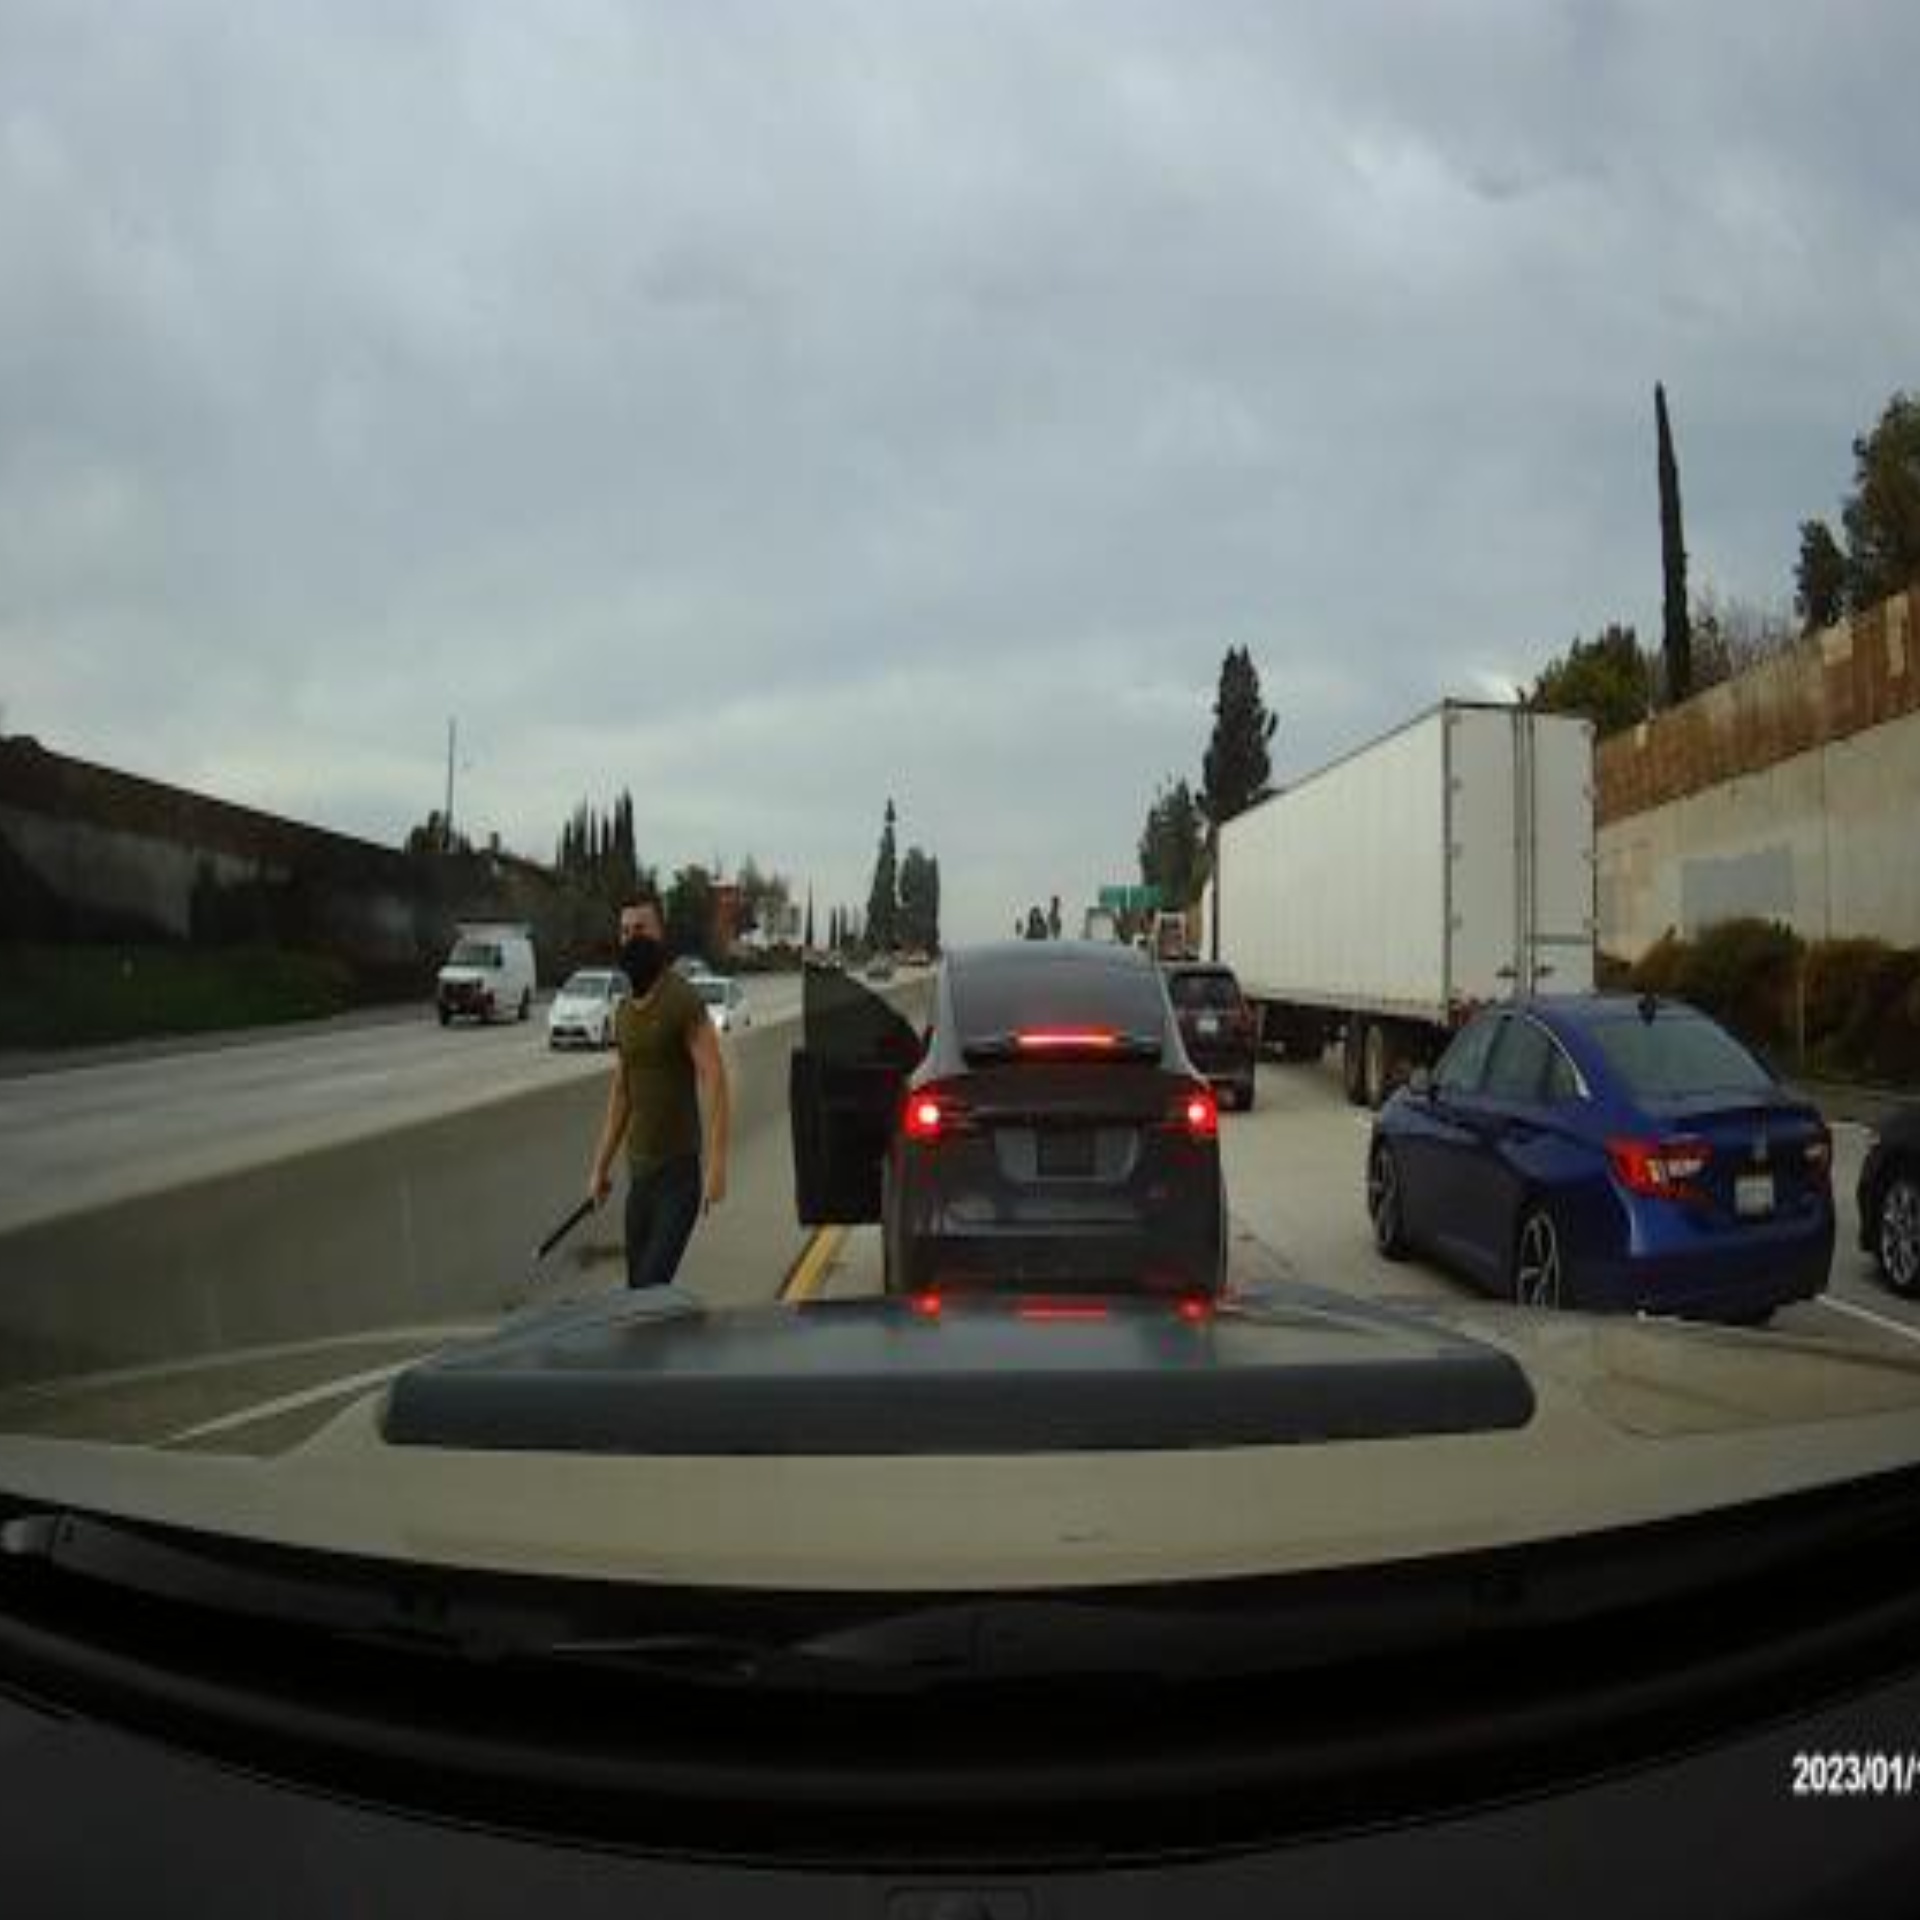  Road Rage: Watch as Tesla driver violently attacks vehicle on Los Angeles freeway with hammer